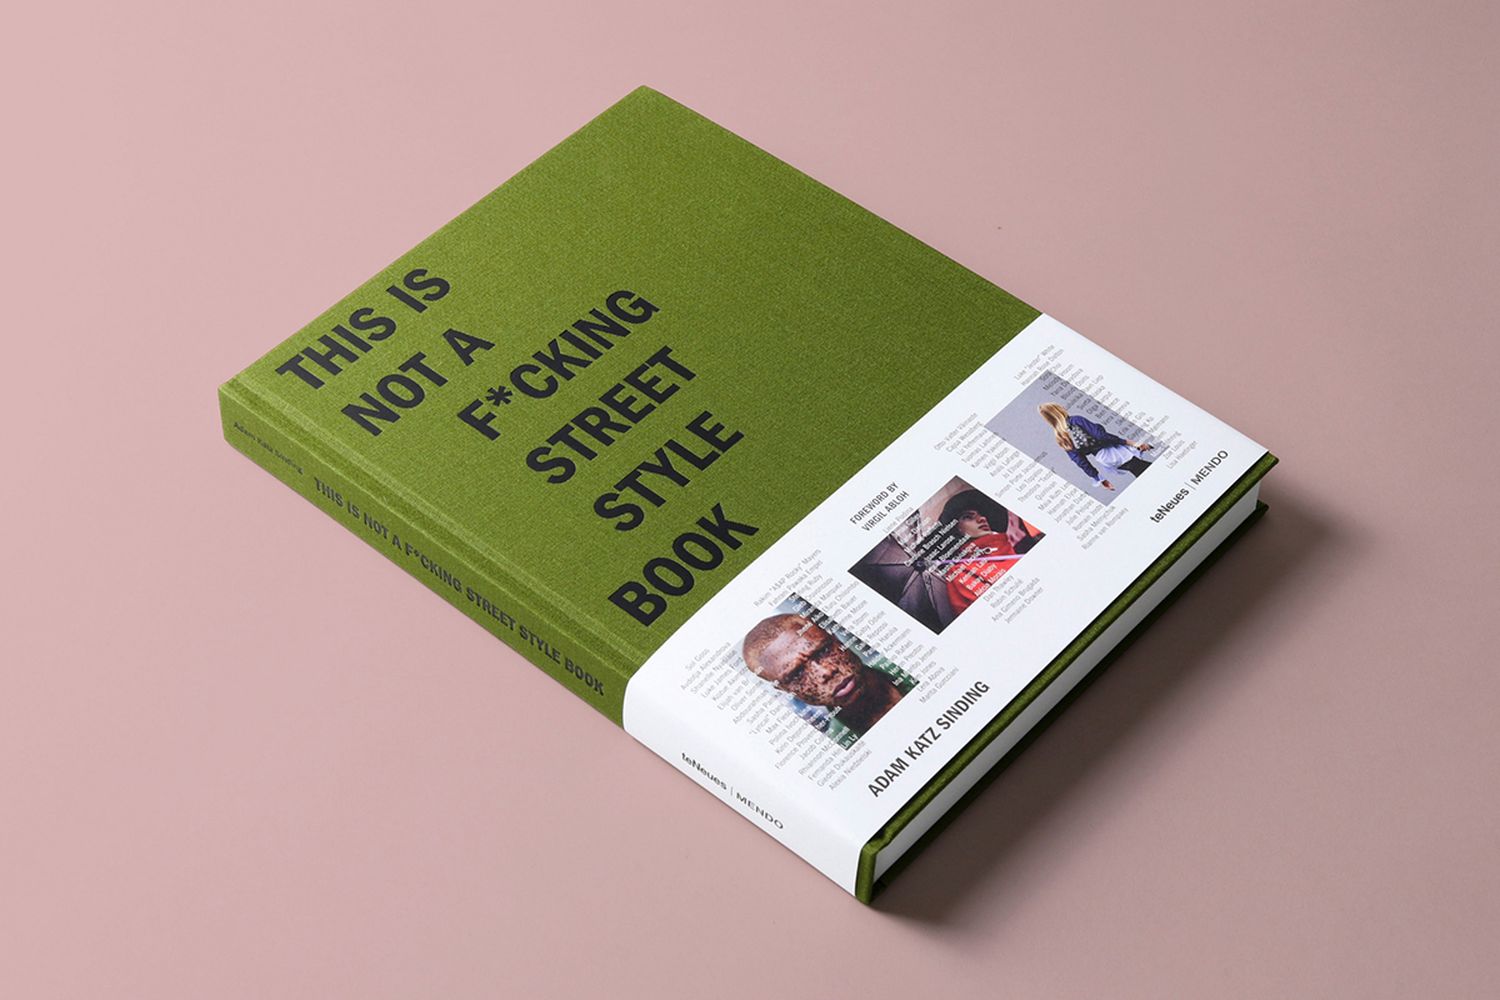 This Is Not A F*cking Street Style Book